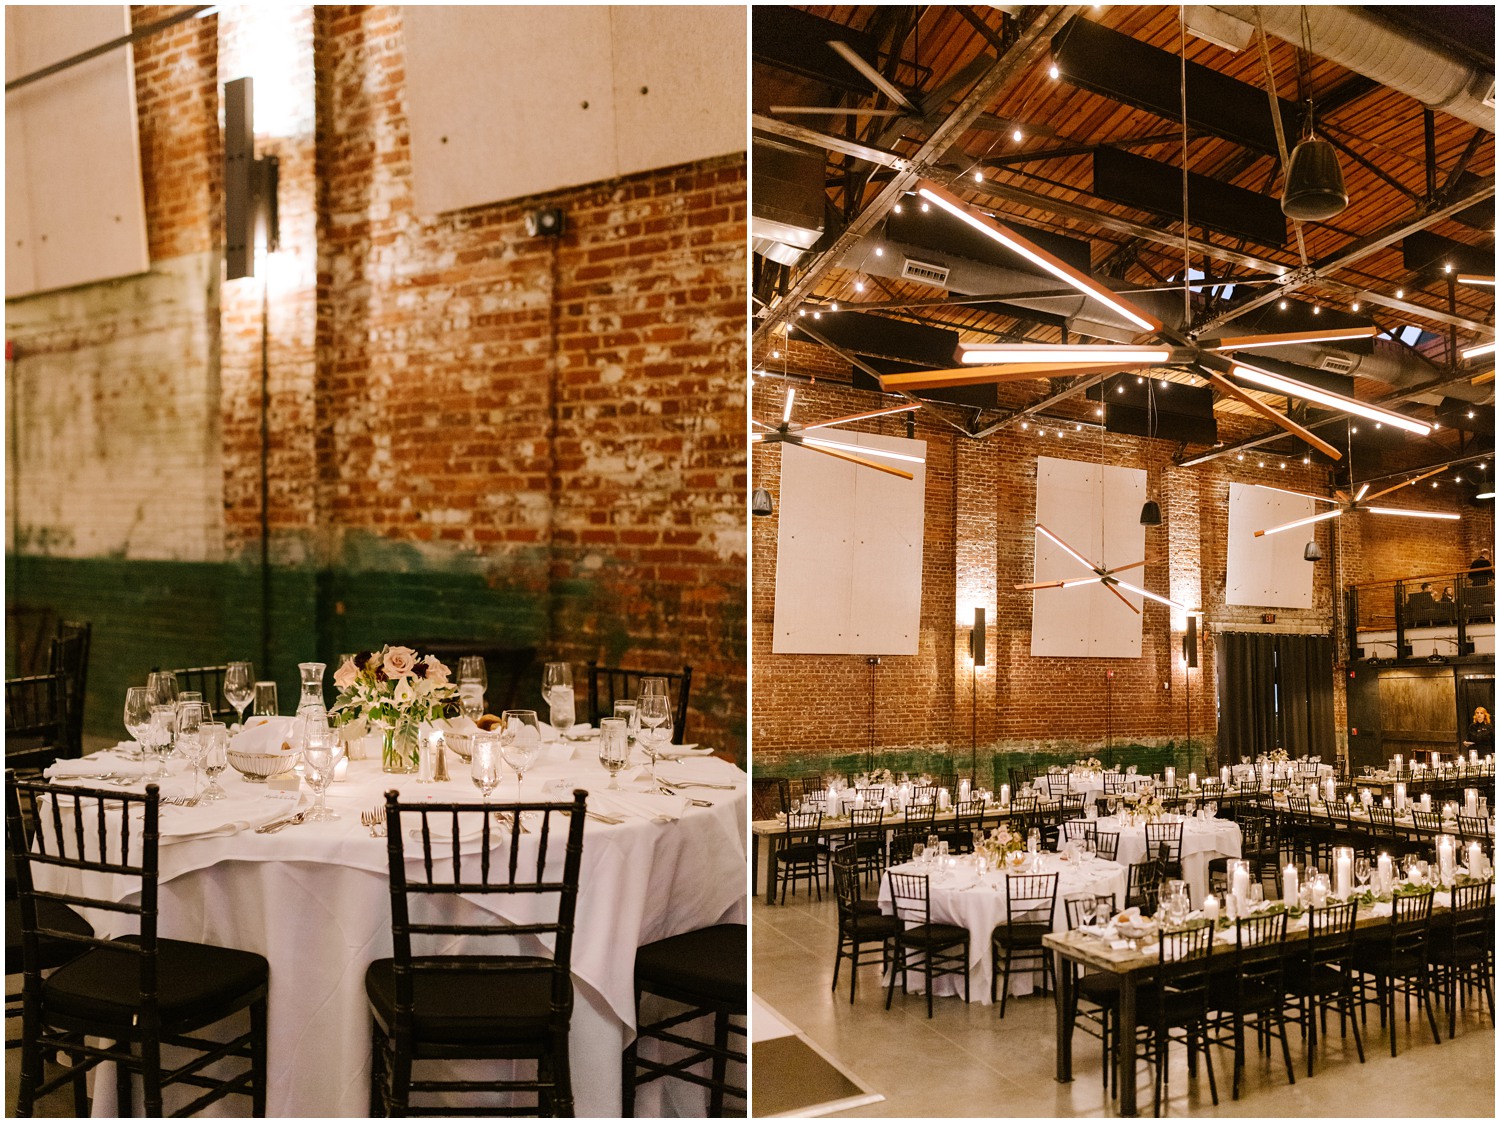 wedding reception table setup at Cadillac Service Garage photographed by Chelsea Renay Photography